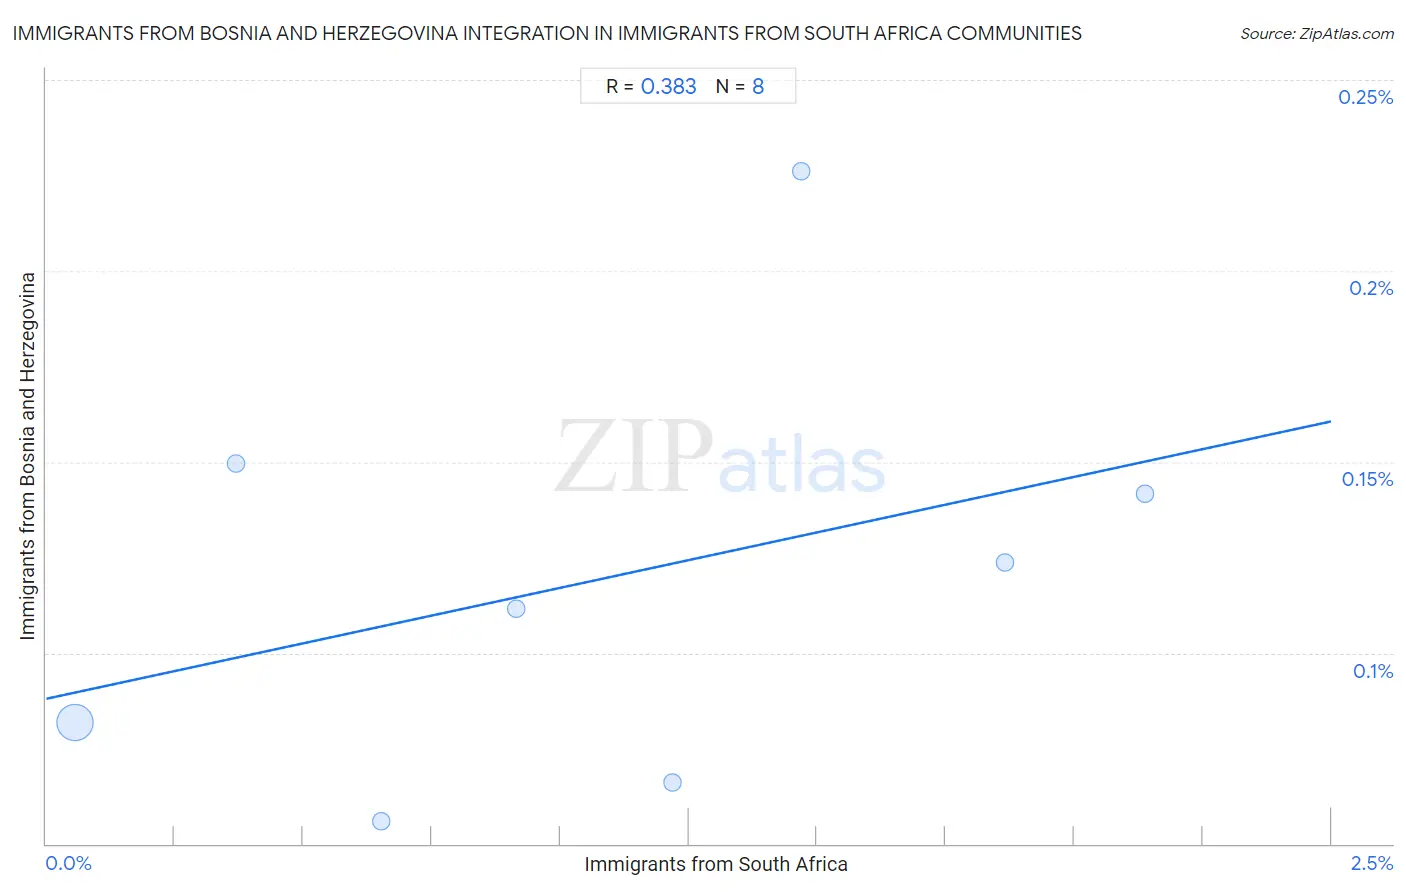 Immigrants from South Africa Integration in Immigrants from Bosnia and Herzegovina Communities